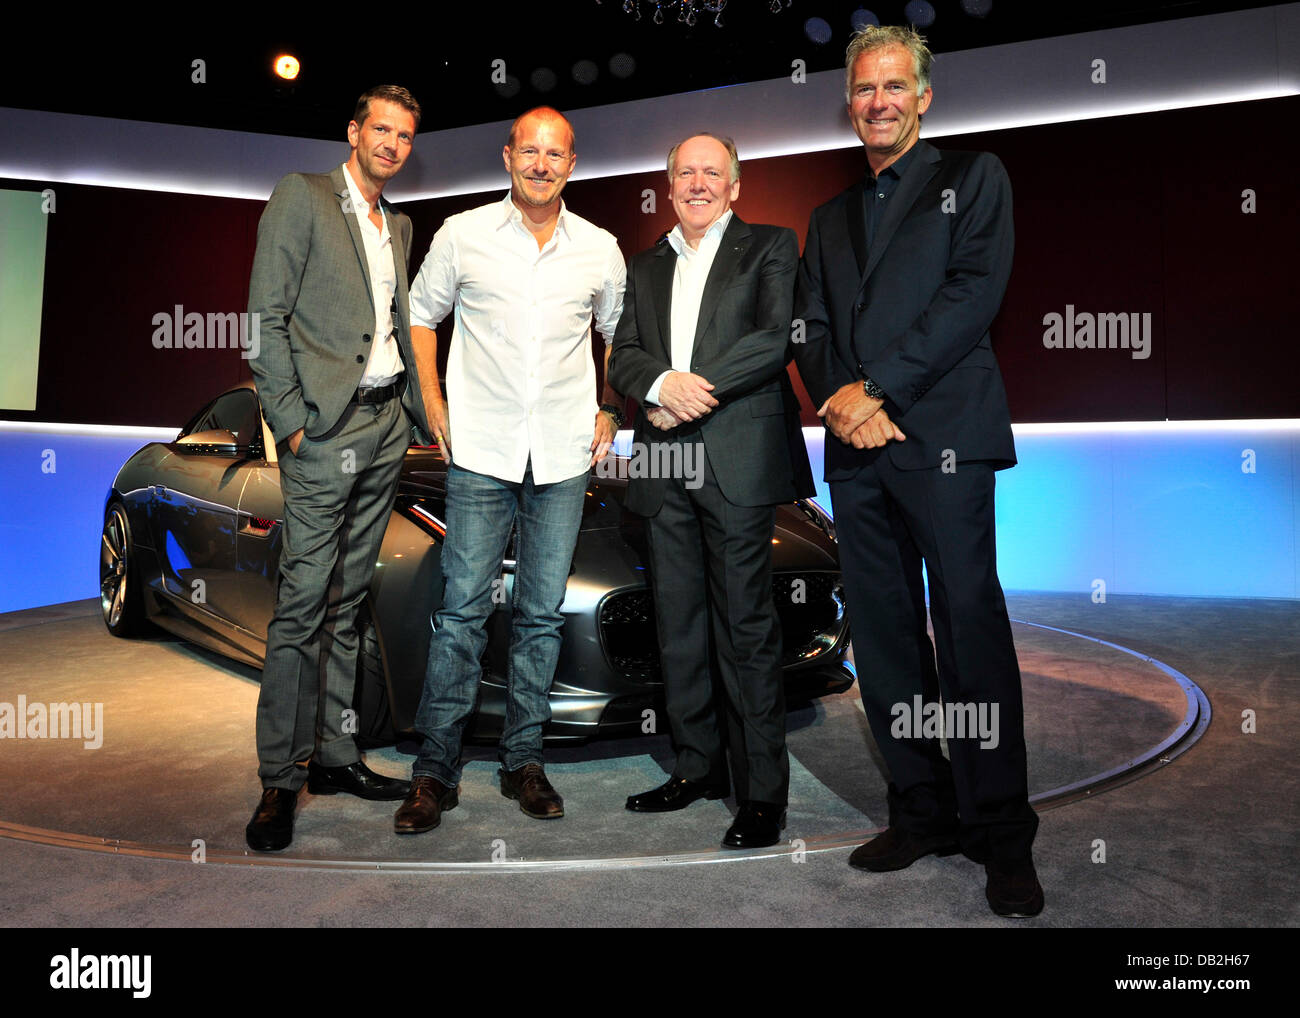 German actors Kai Wiesinger (from L) and Heino Ferch stand together with Ian Callum, head designer for Jaguar, and former race driver Christian Danner stand next to the concept sports car Jaguar C-X16 after its presentation at Palais Thurn und Taxis at the International Motor Show IAA in Frankfurt Main, Germany, 12 September 2011. From 15 to 25 September 2011 exhibitors from all ov Stock Photo